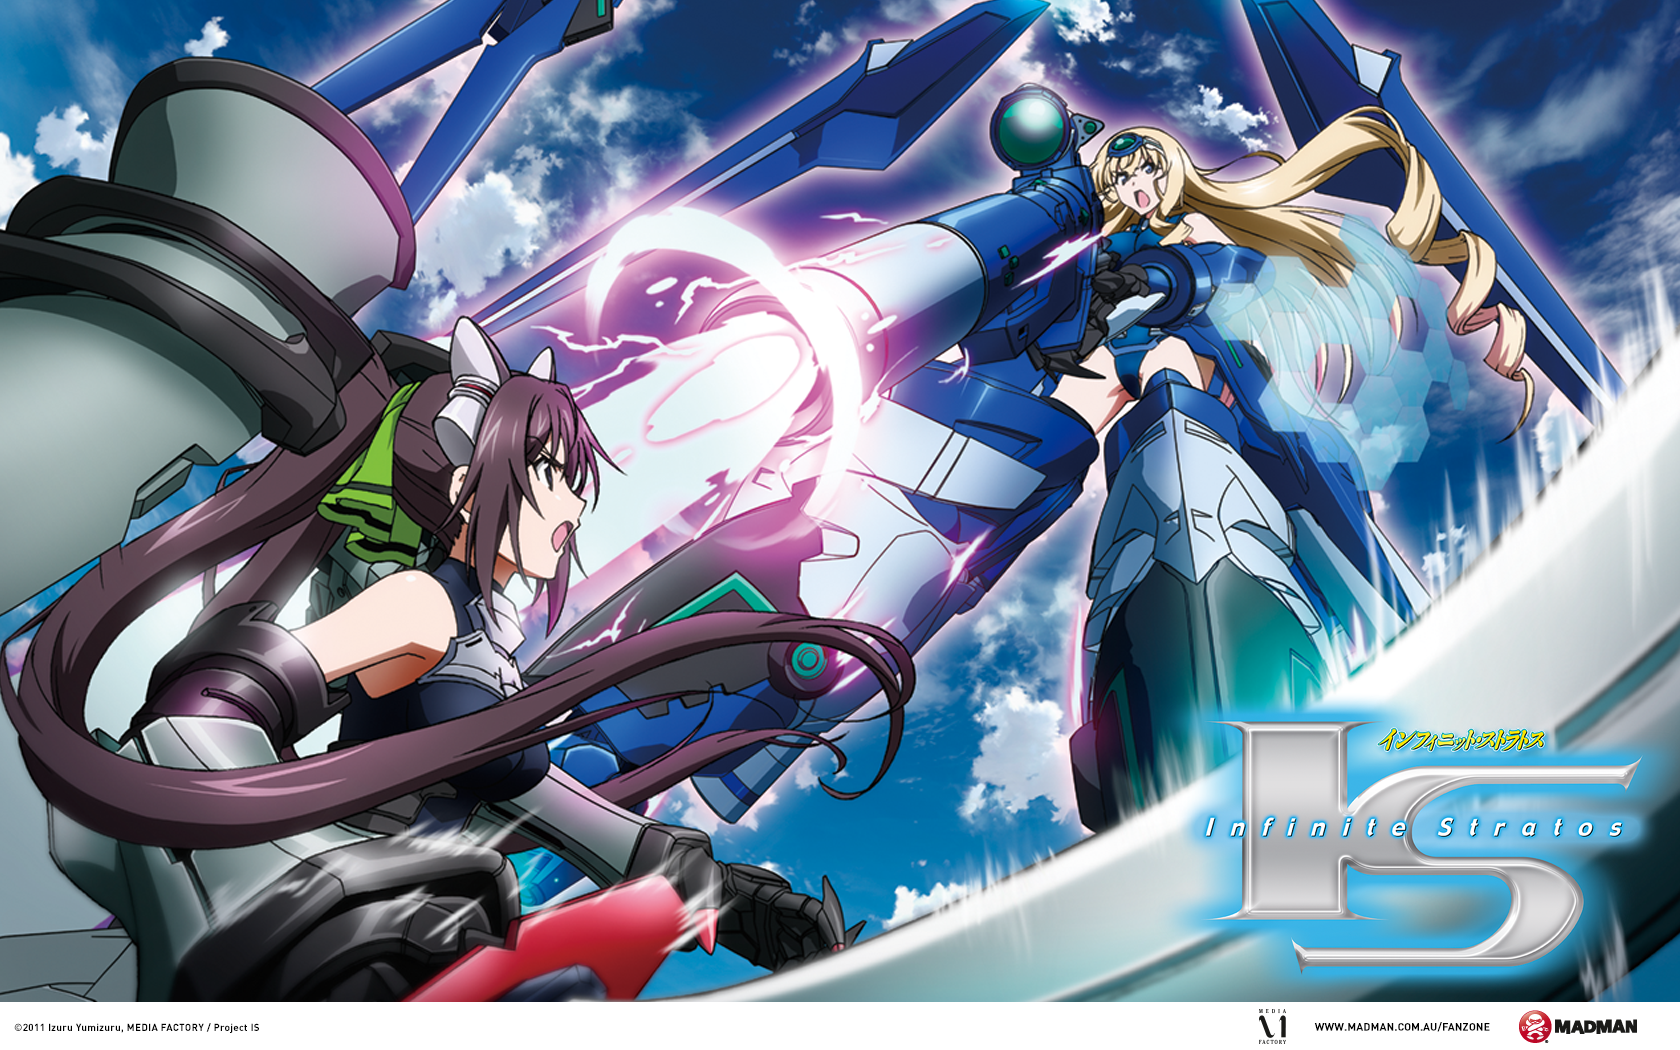 Fight in the anime Endless skies wallpaper and image